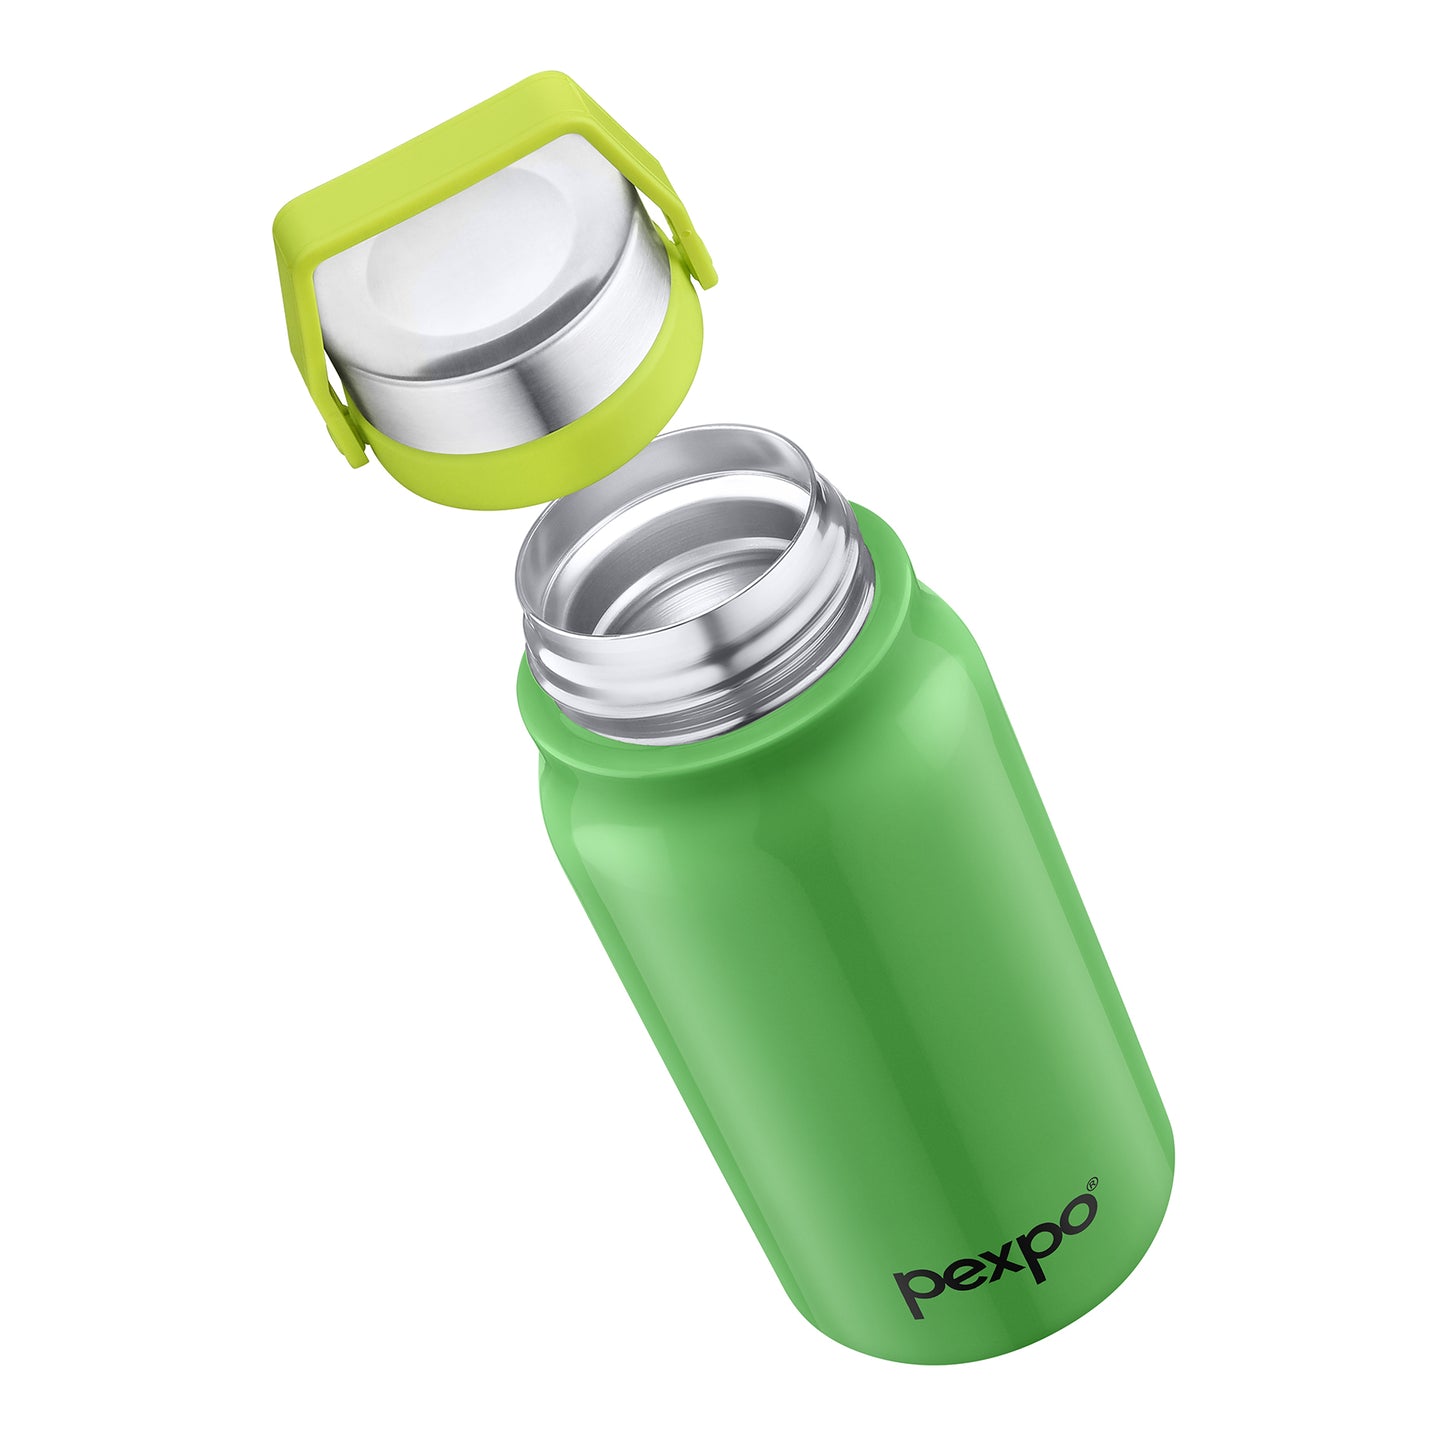 Pexpo Pluto- Stainless Steel Hot and Cold Vacuum Insulated Flask | Lightweight & Keeps Drinks Hot/Cold for 24+ Hours